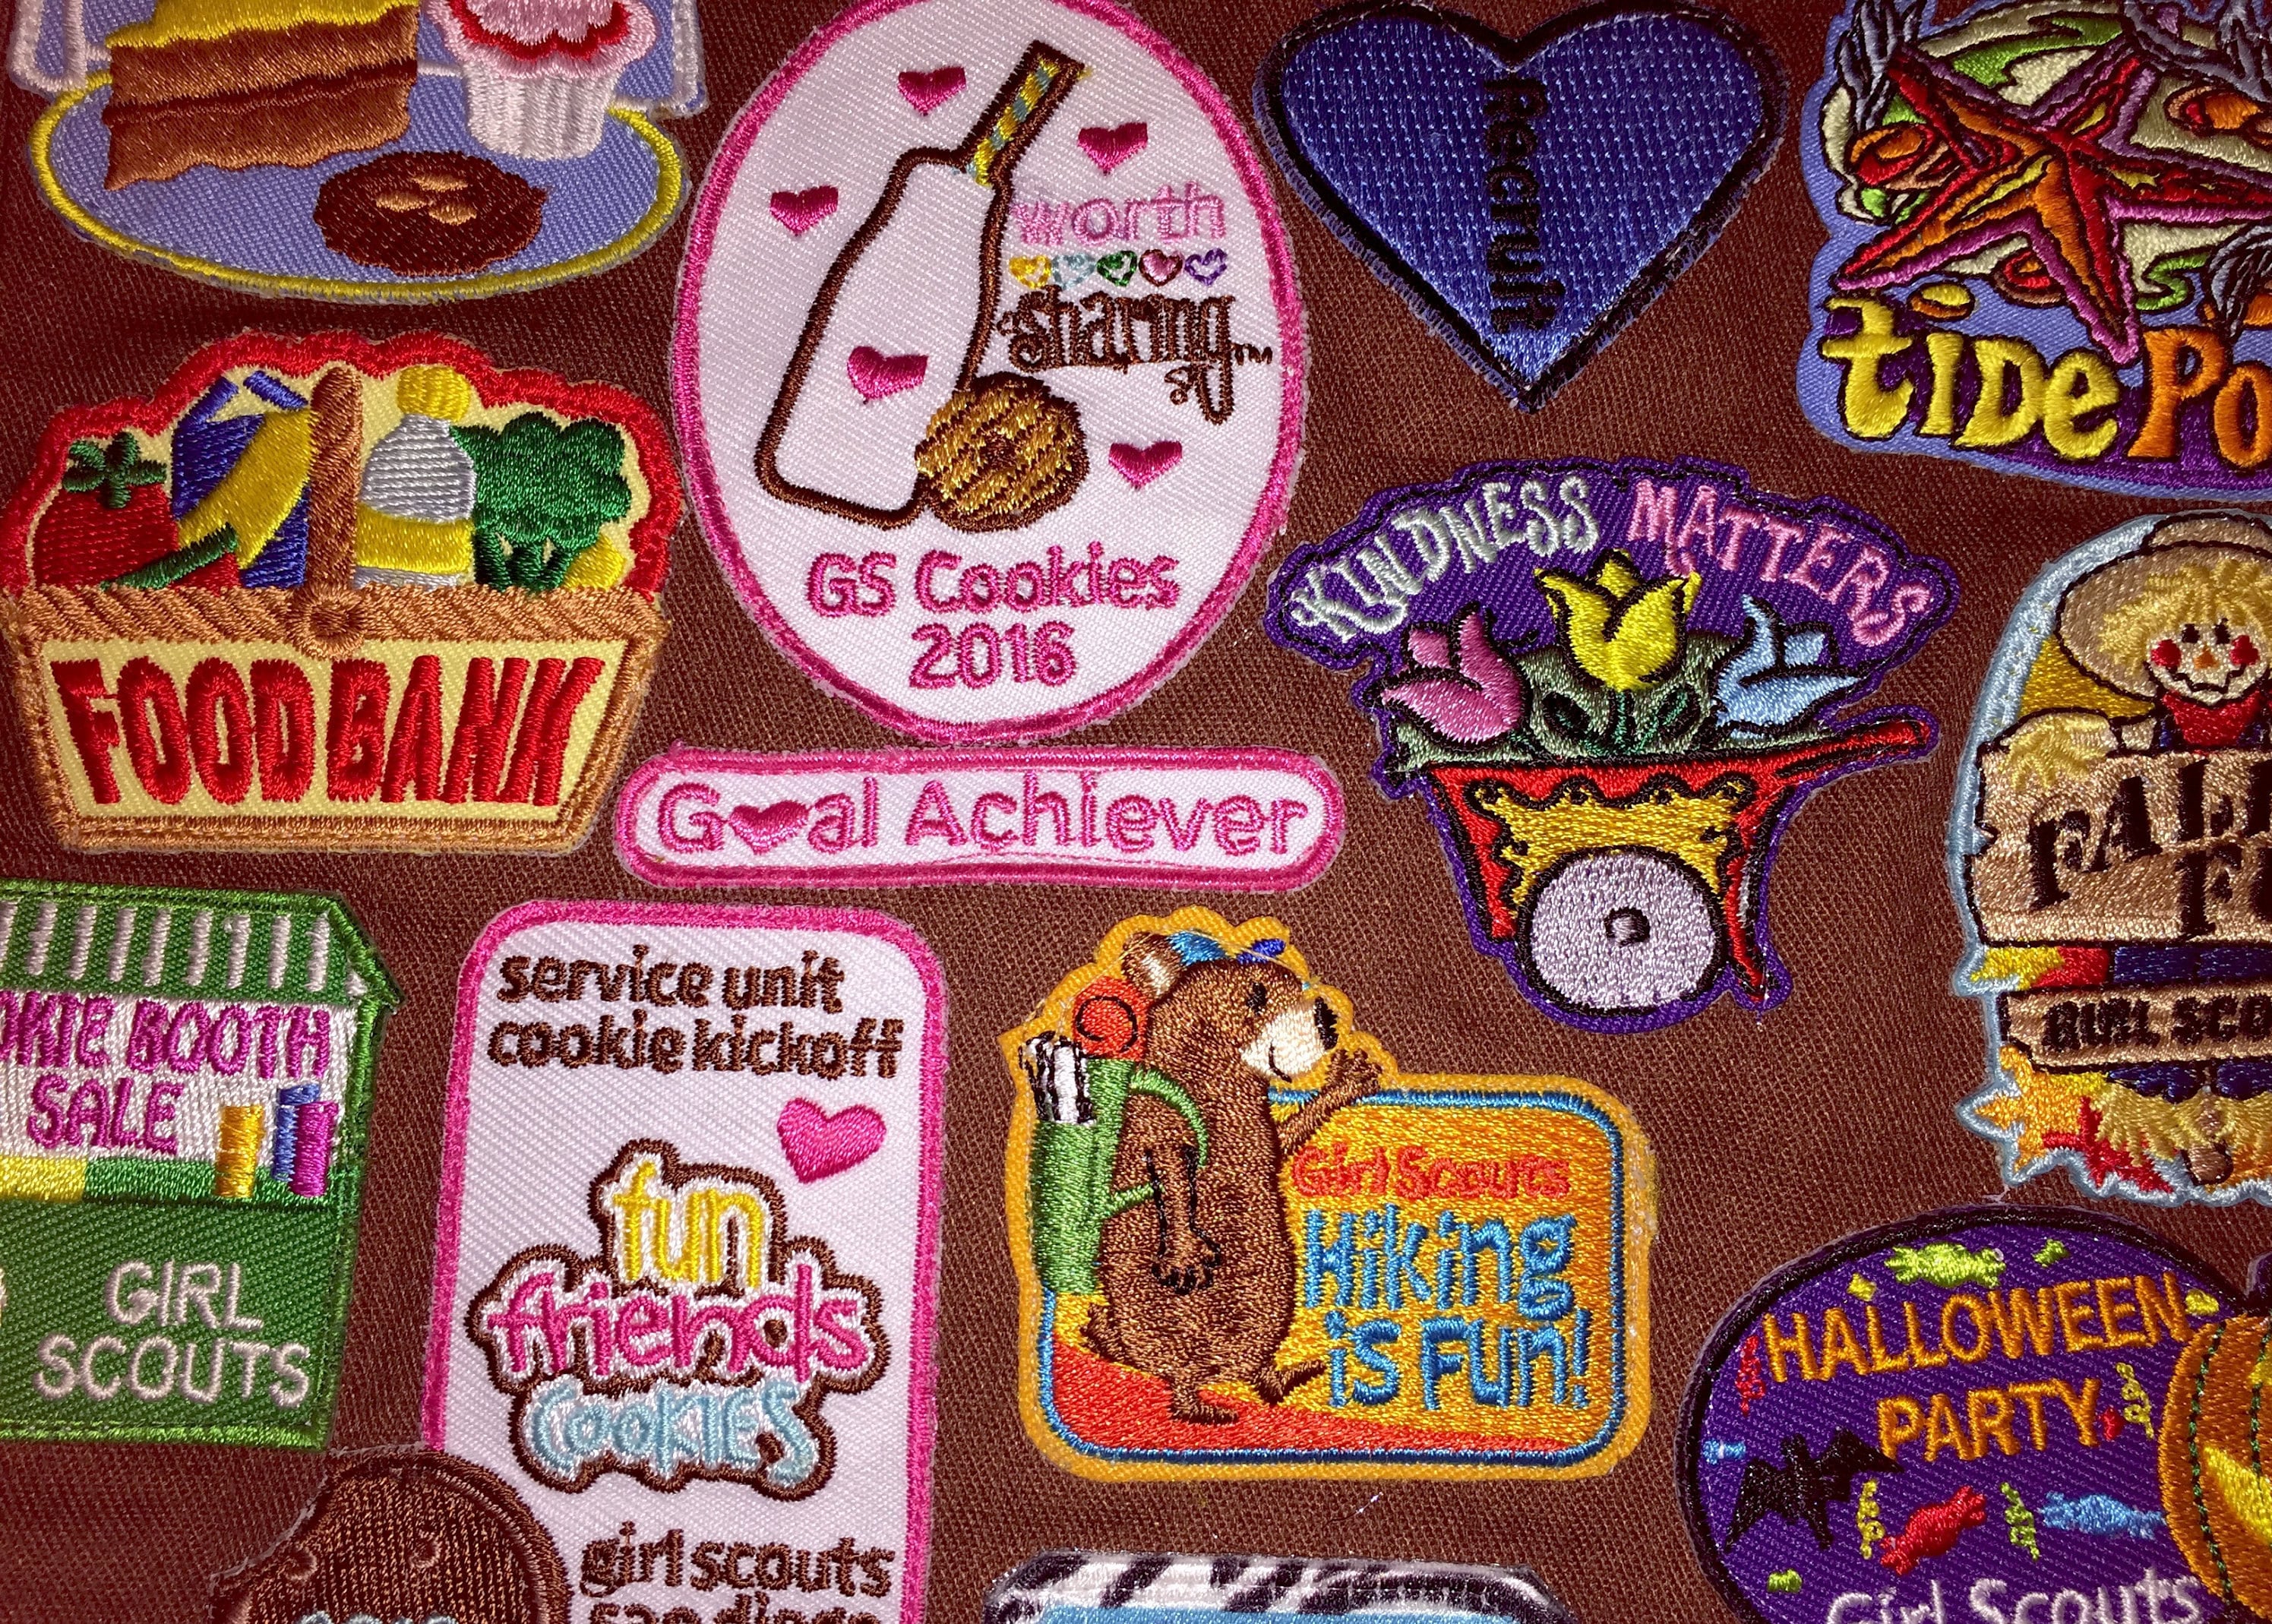 Lot of 7 Vintage 1980s Girl Scout Patches Cat Patch 80s Craft